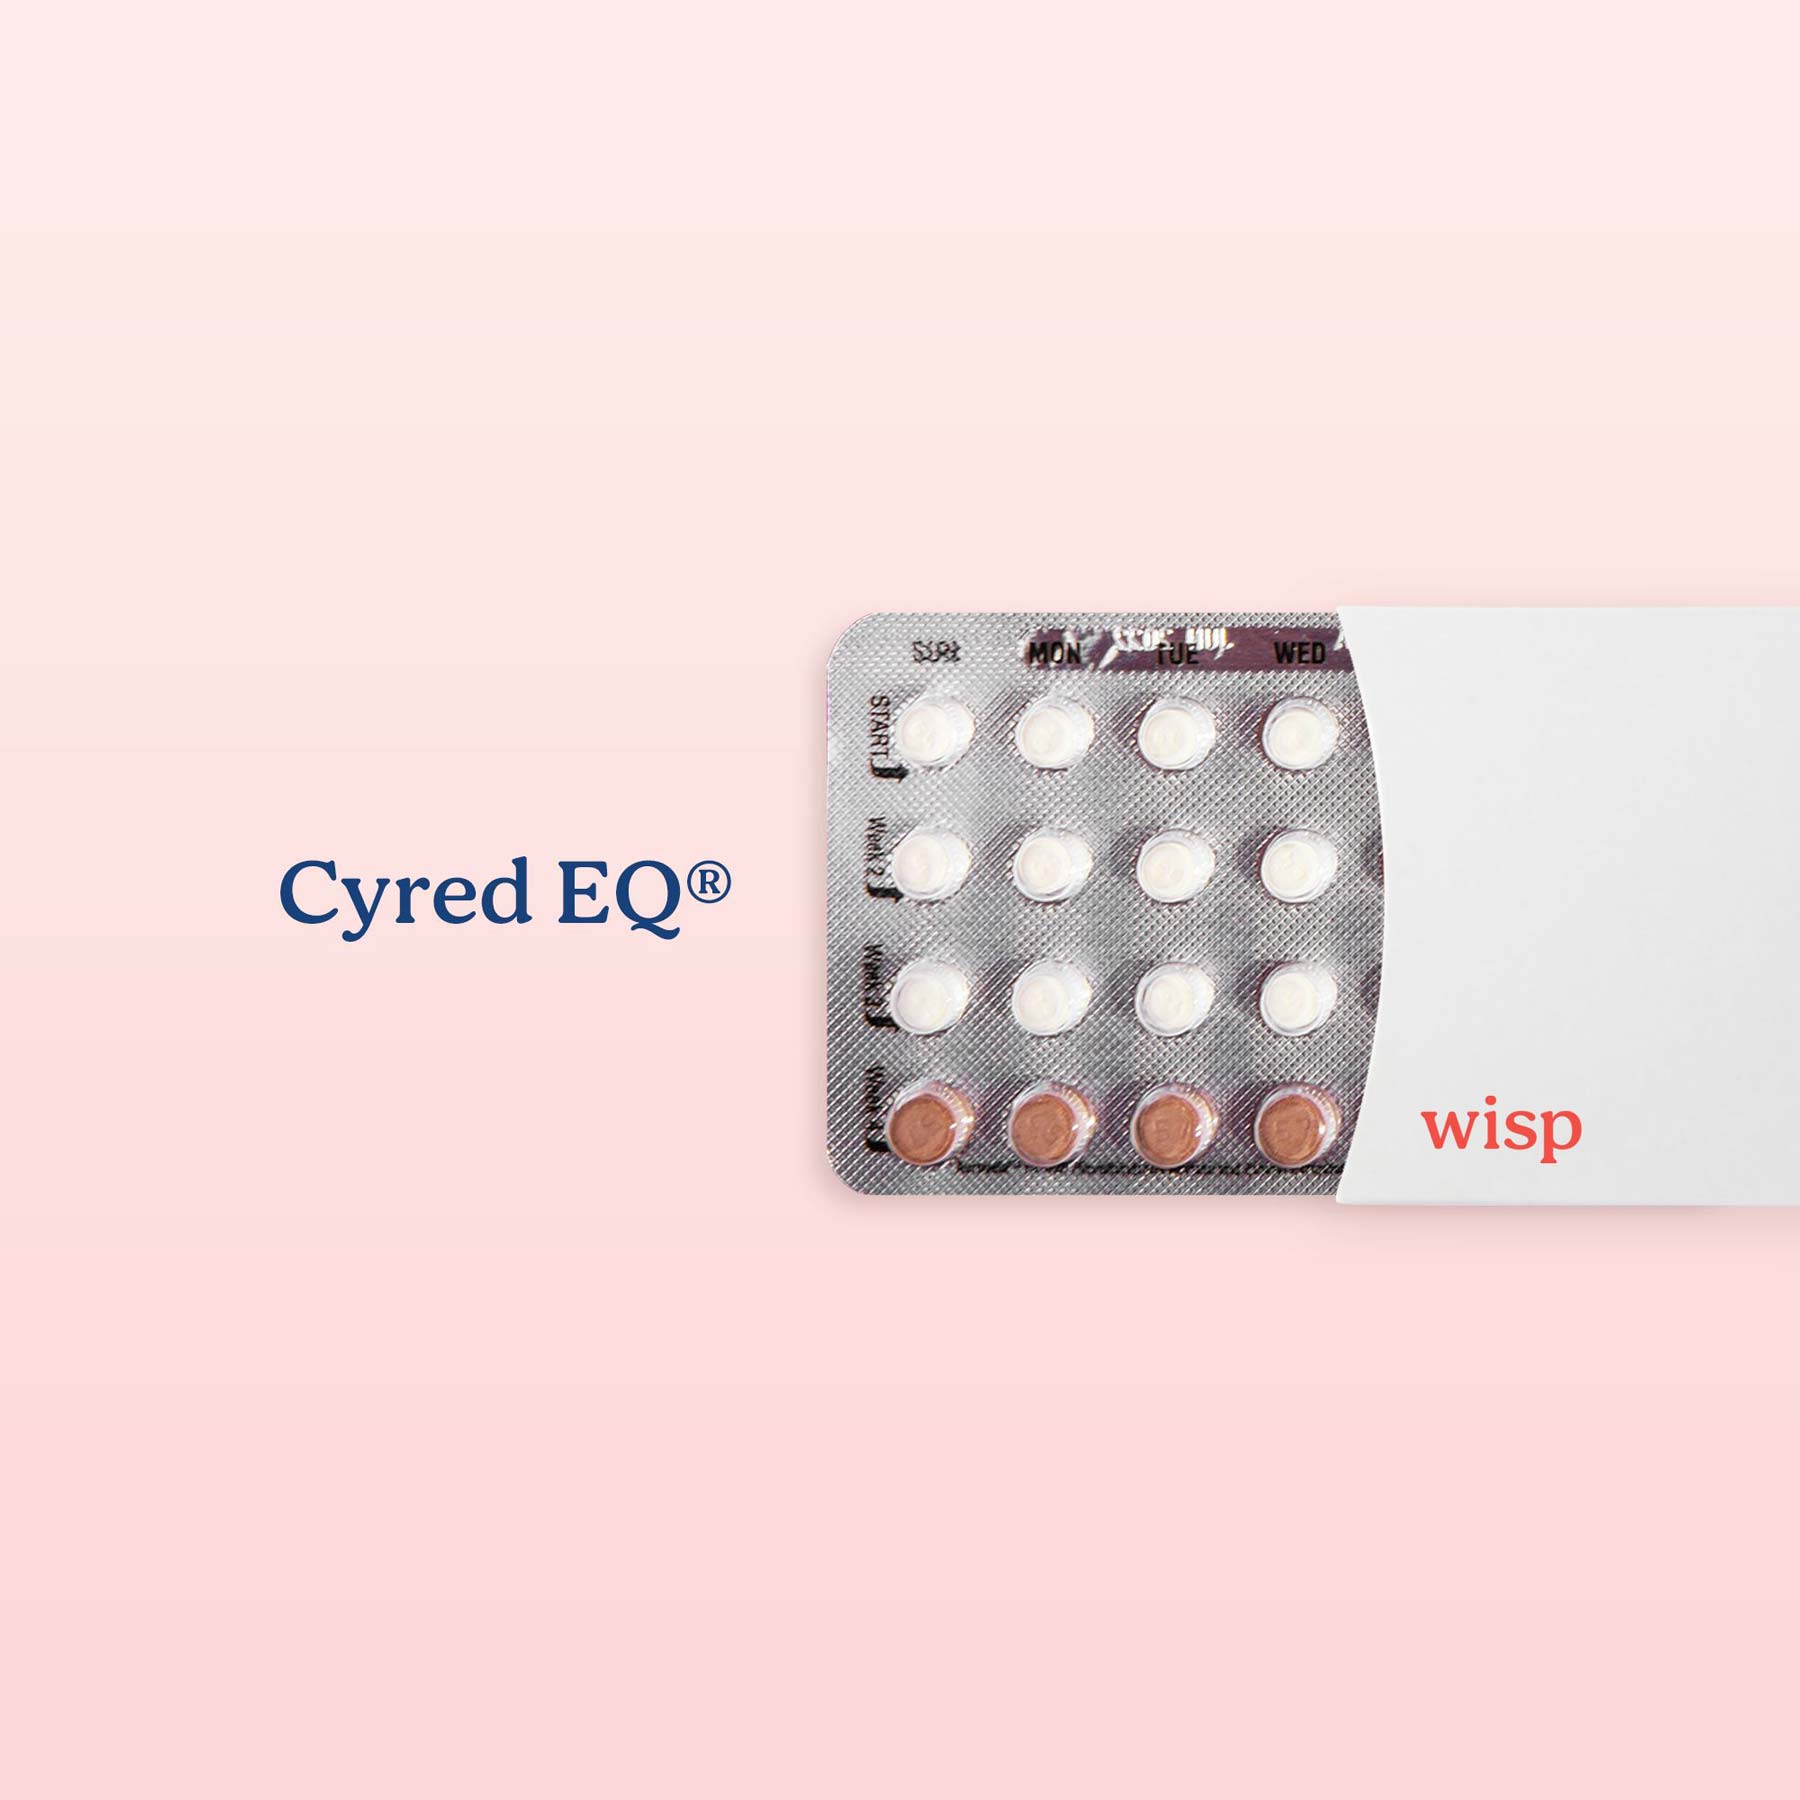 Packet of Cyred EQ birth control pills on a pink background